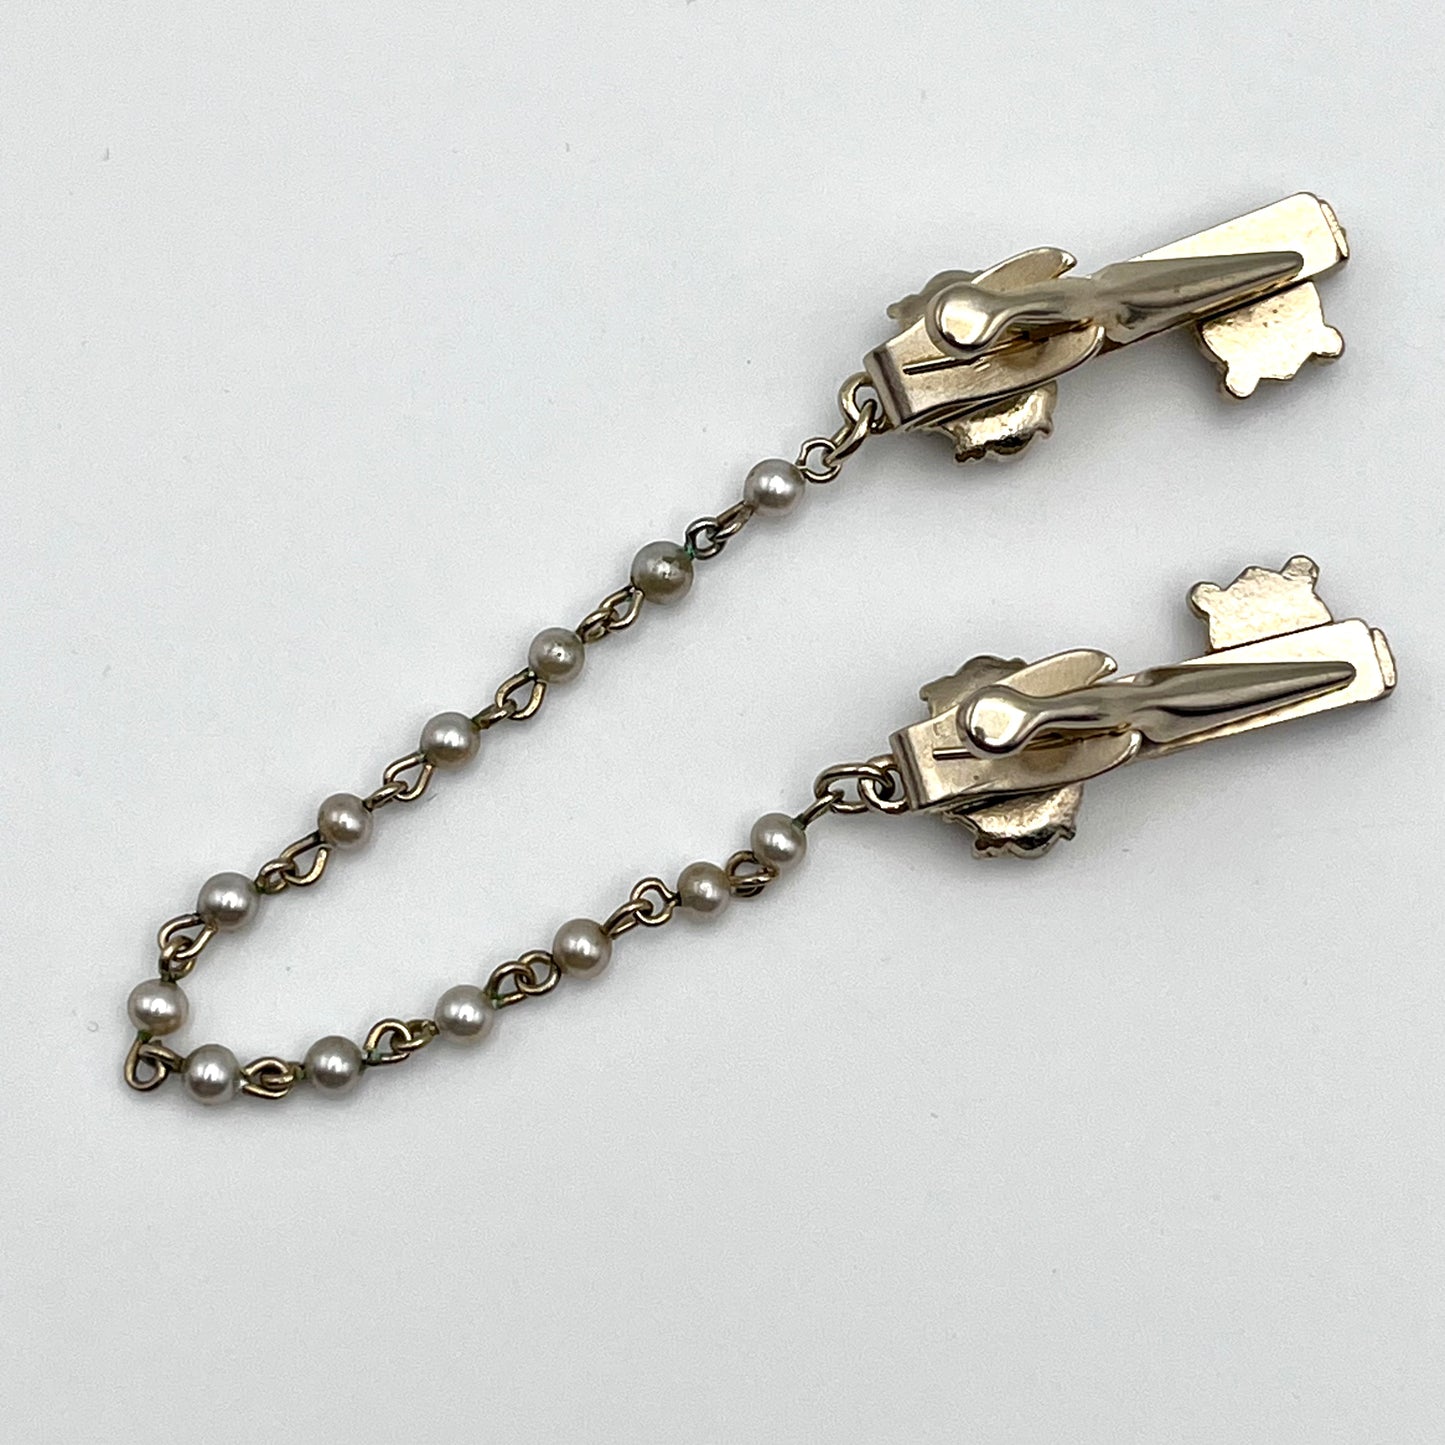 Late 50s/ Early 60s Key Shaped Sweater Clip